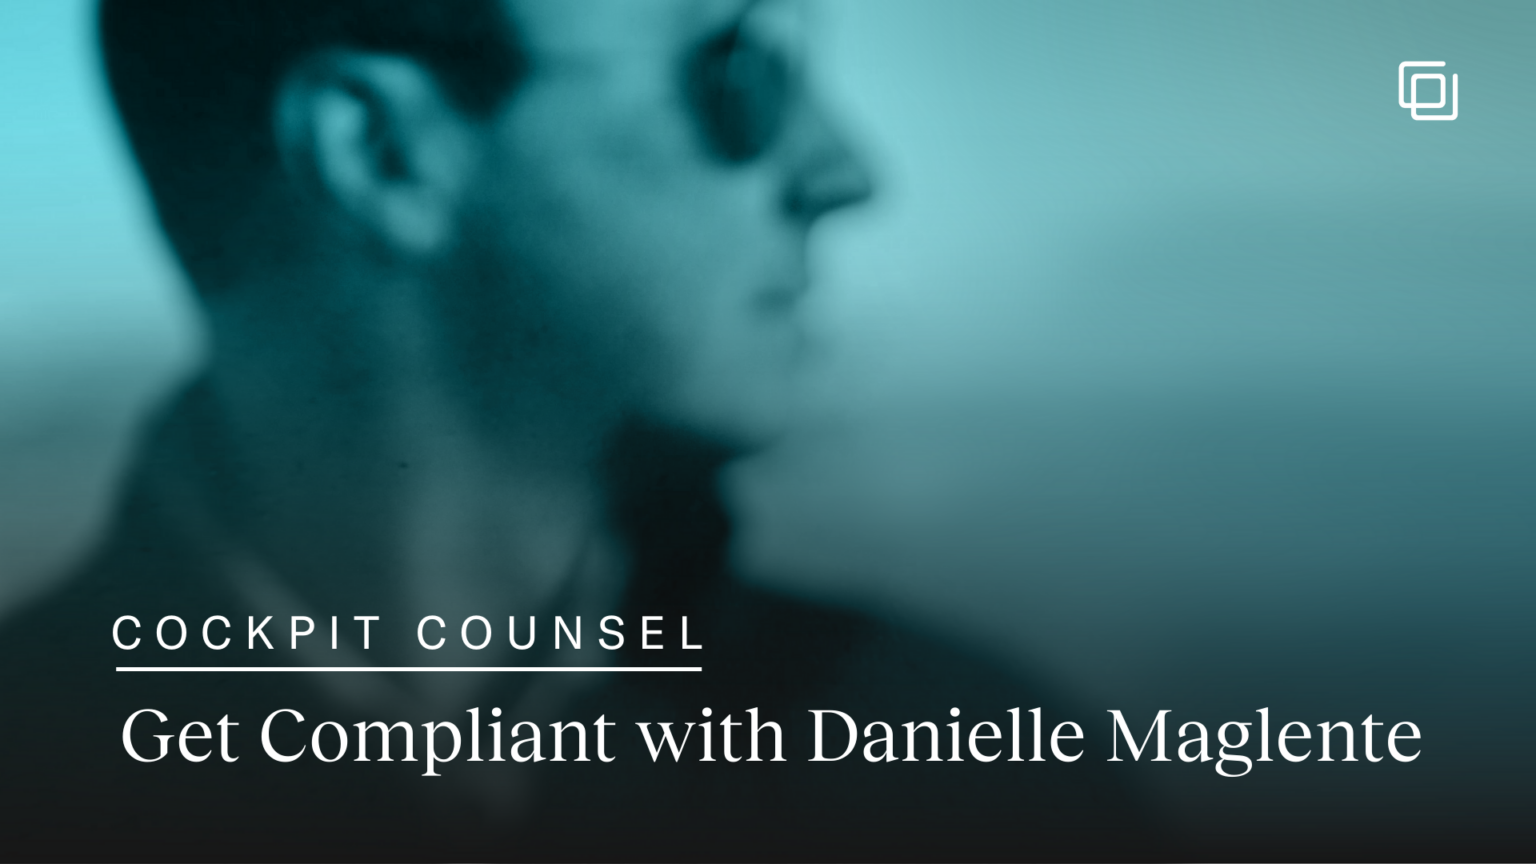 Cockpit Counsel: Get Compliant with Danielle Maglente